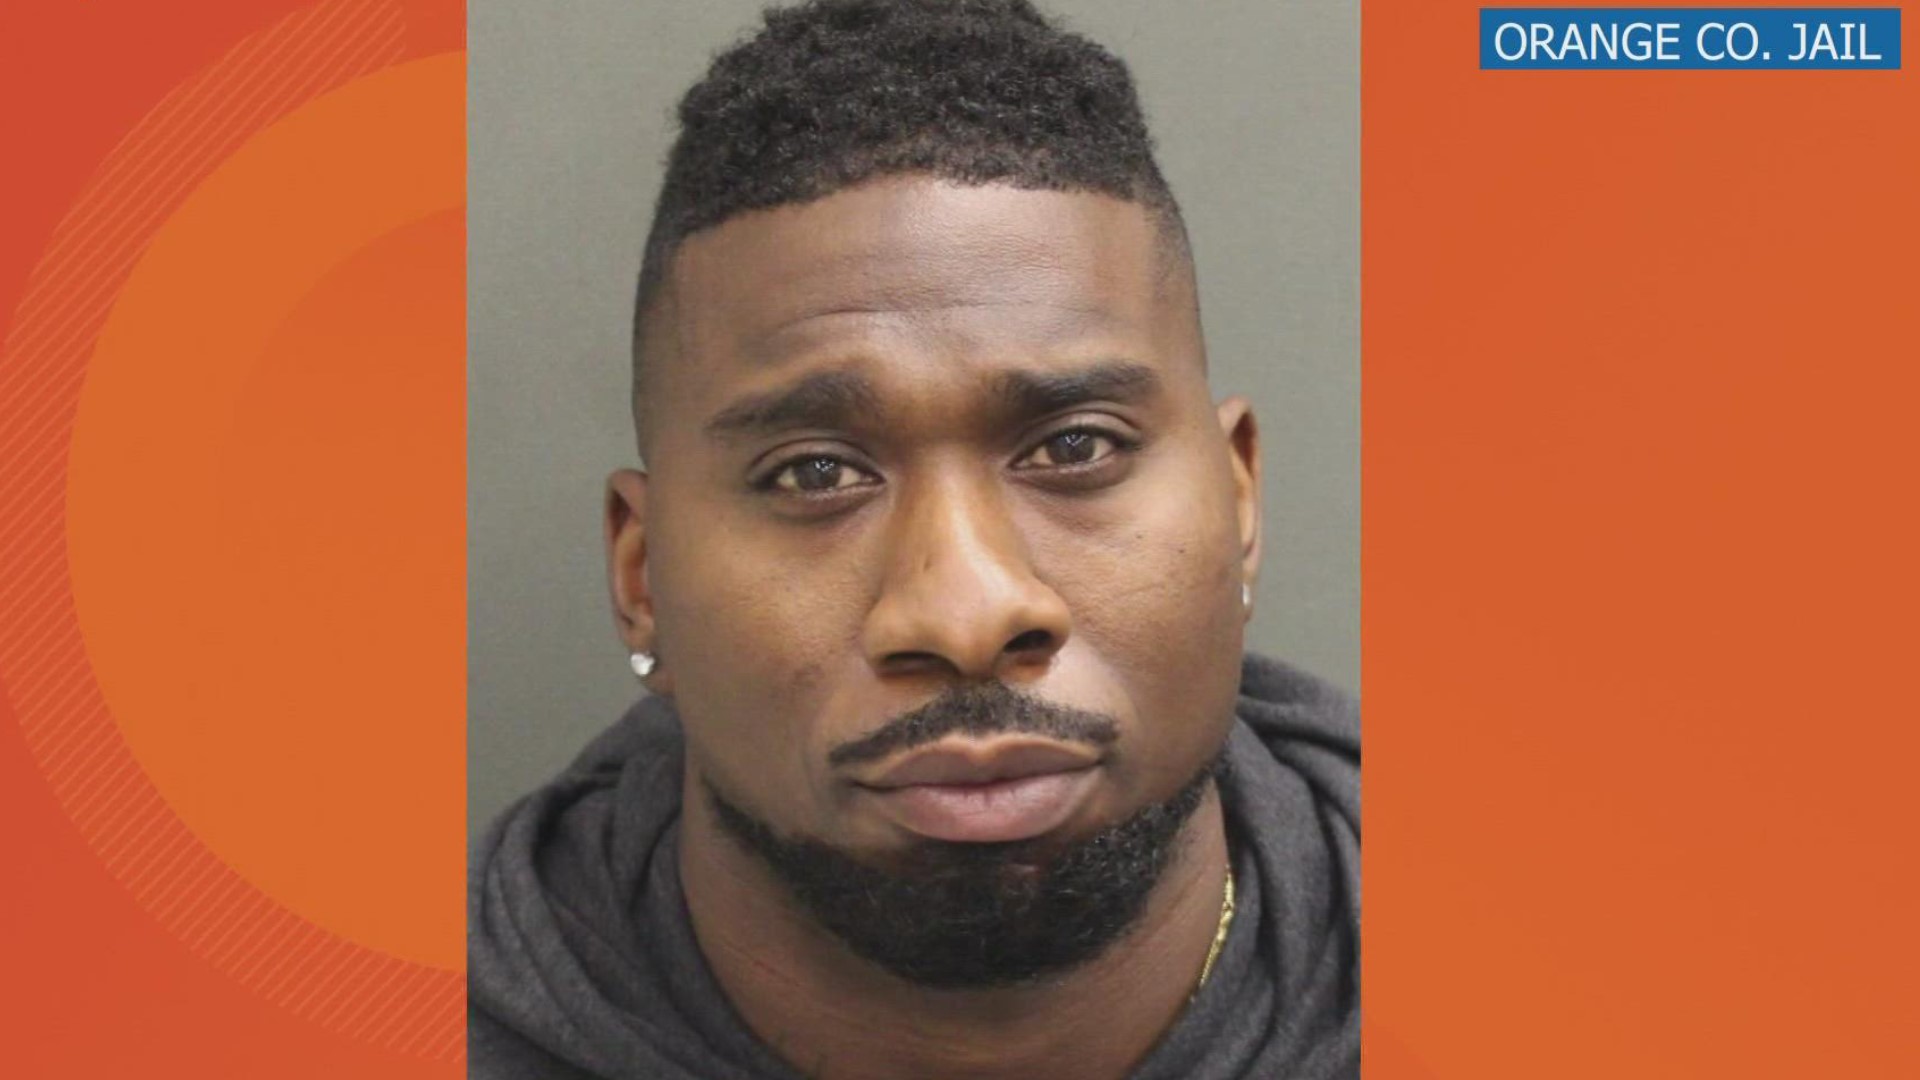 Jail records show he was arrested in Orlando and accused of attacking a woman.